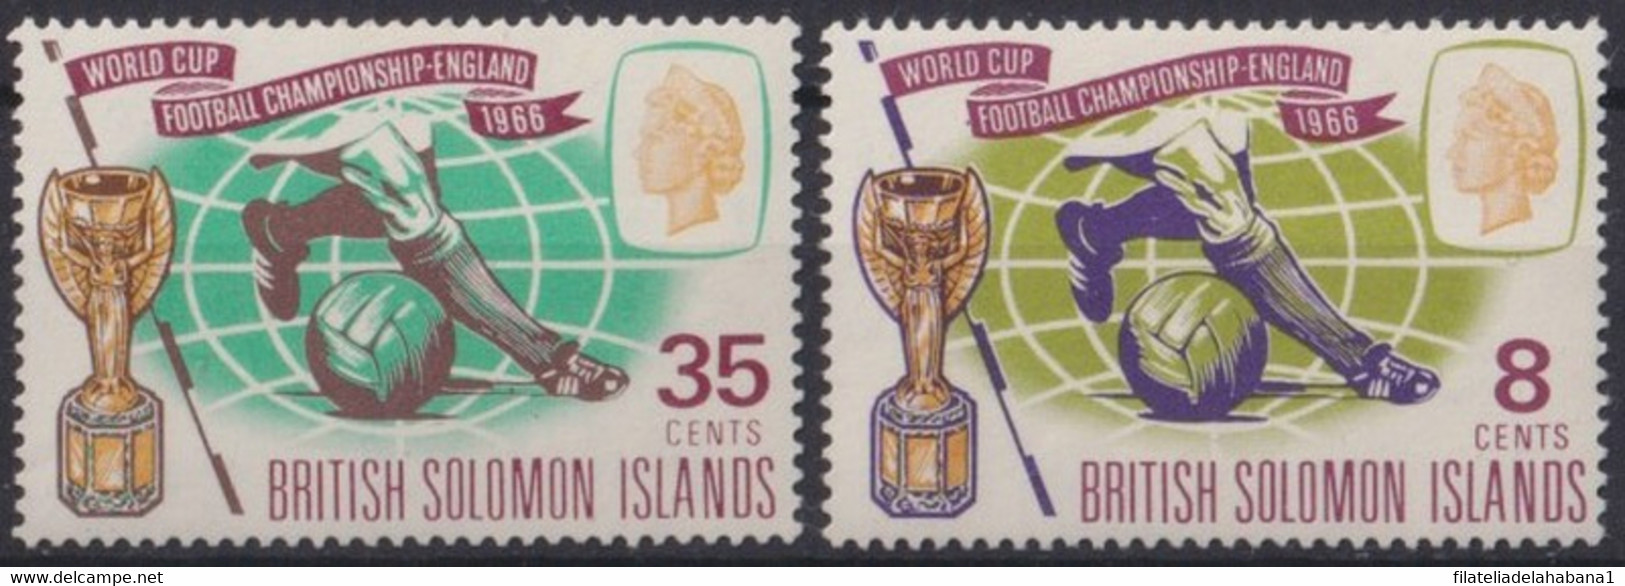 F-EX36438 SOLOMON IS 1966 MNH WORLD CHAMPIONSHIP SOCCER CUP FOOTBALL. - 1966 – Angleterre